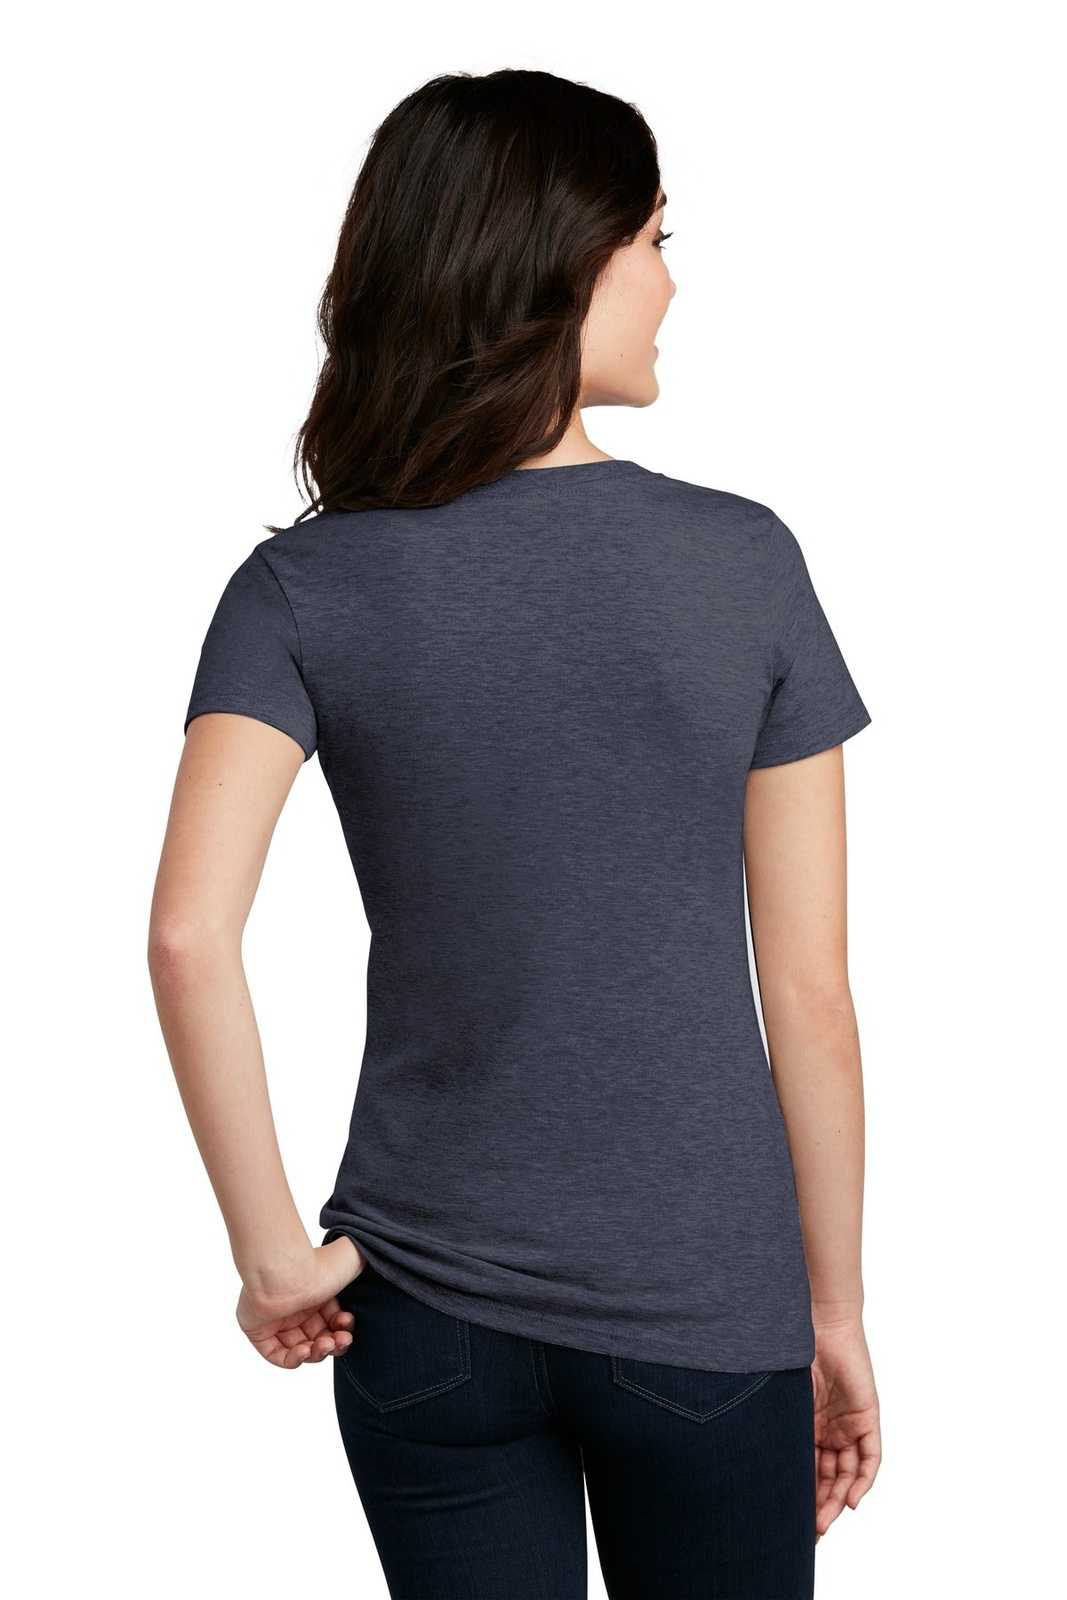 District DM1190L Women's Perfect Blend V-Neck Tee - Heathered Navy - HIT a Double - 1